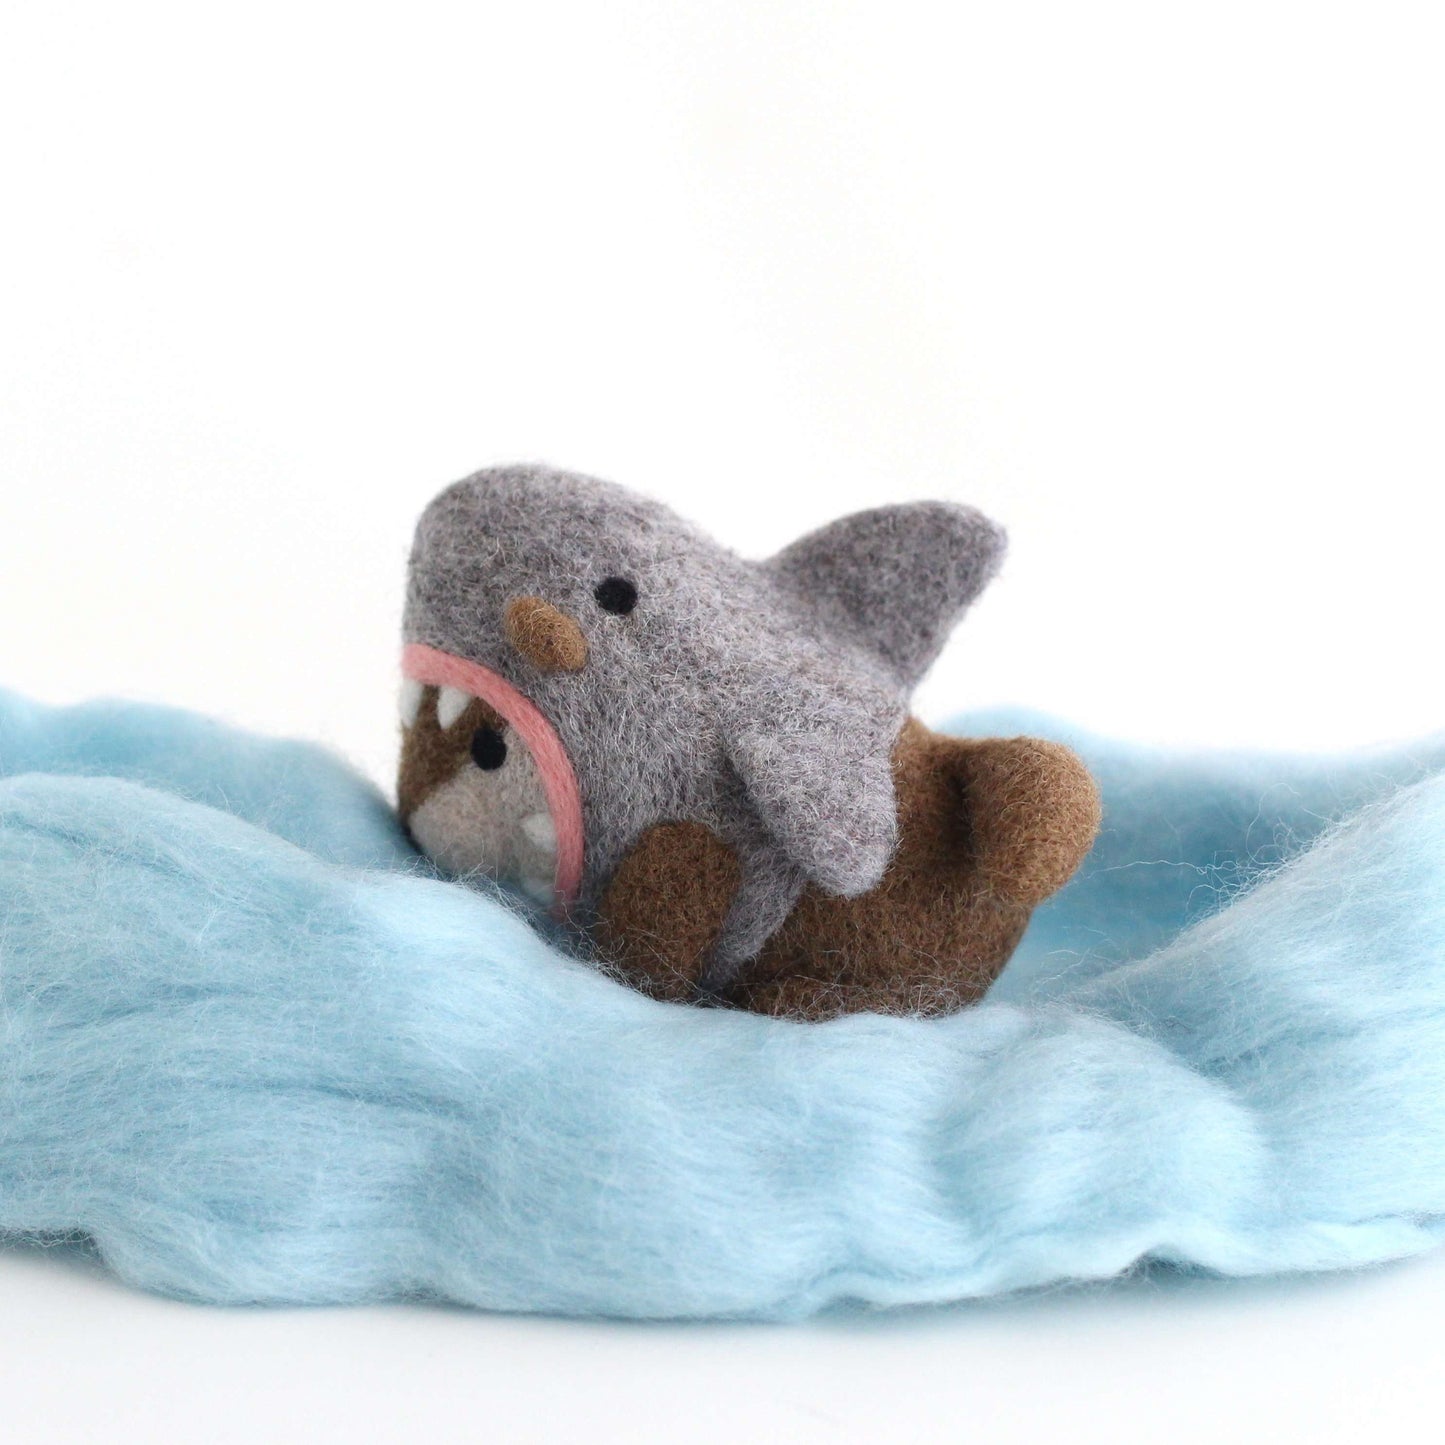 Needle Felted River Otter in a Shark Costume